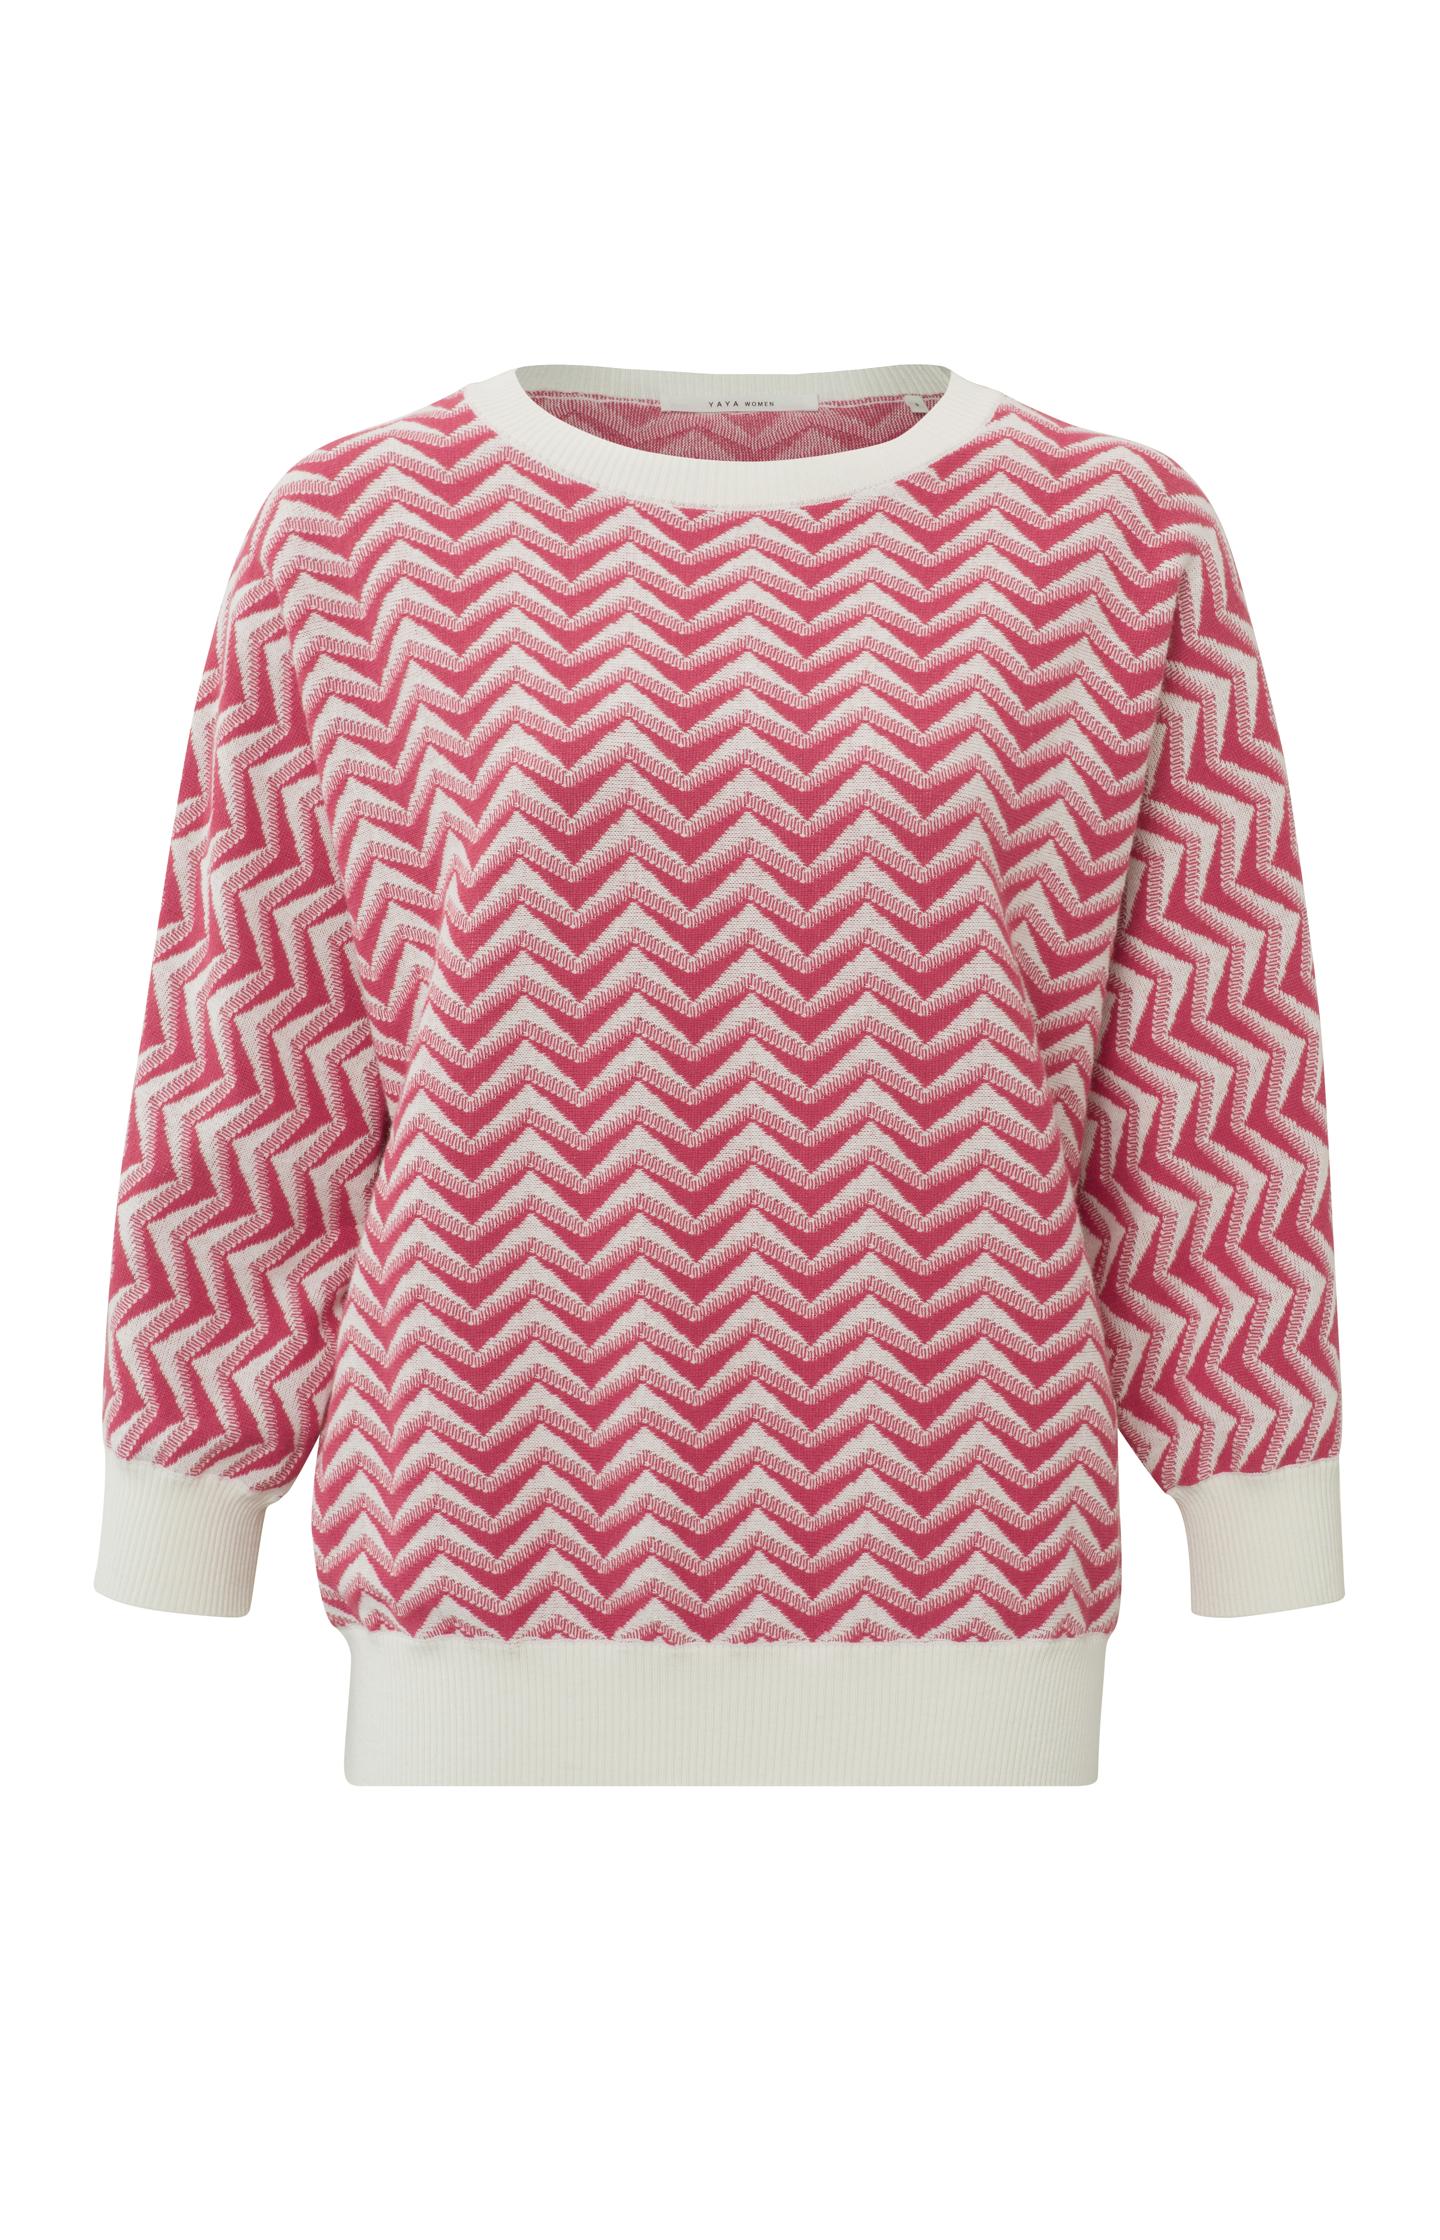 Jacquard sweater with round neck, 7/8 sleeves and print - Type: product